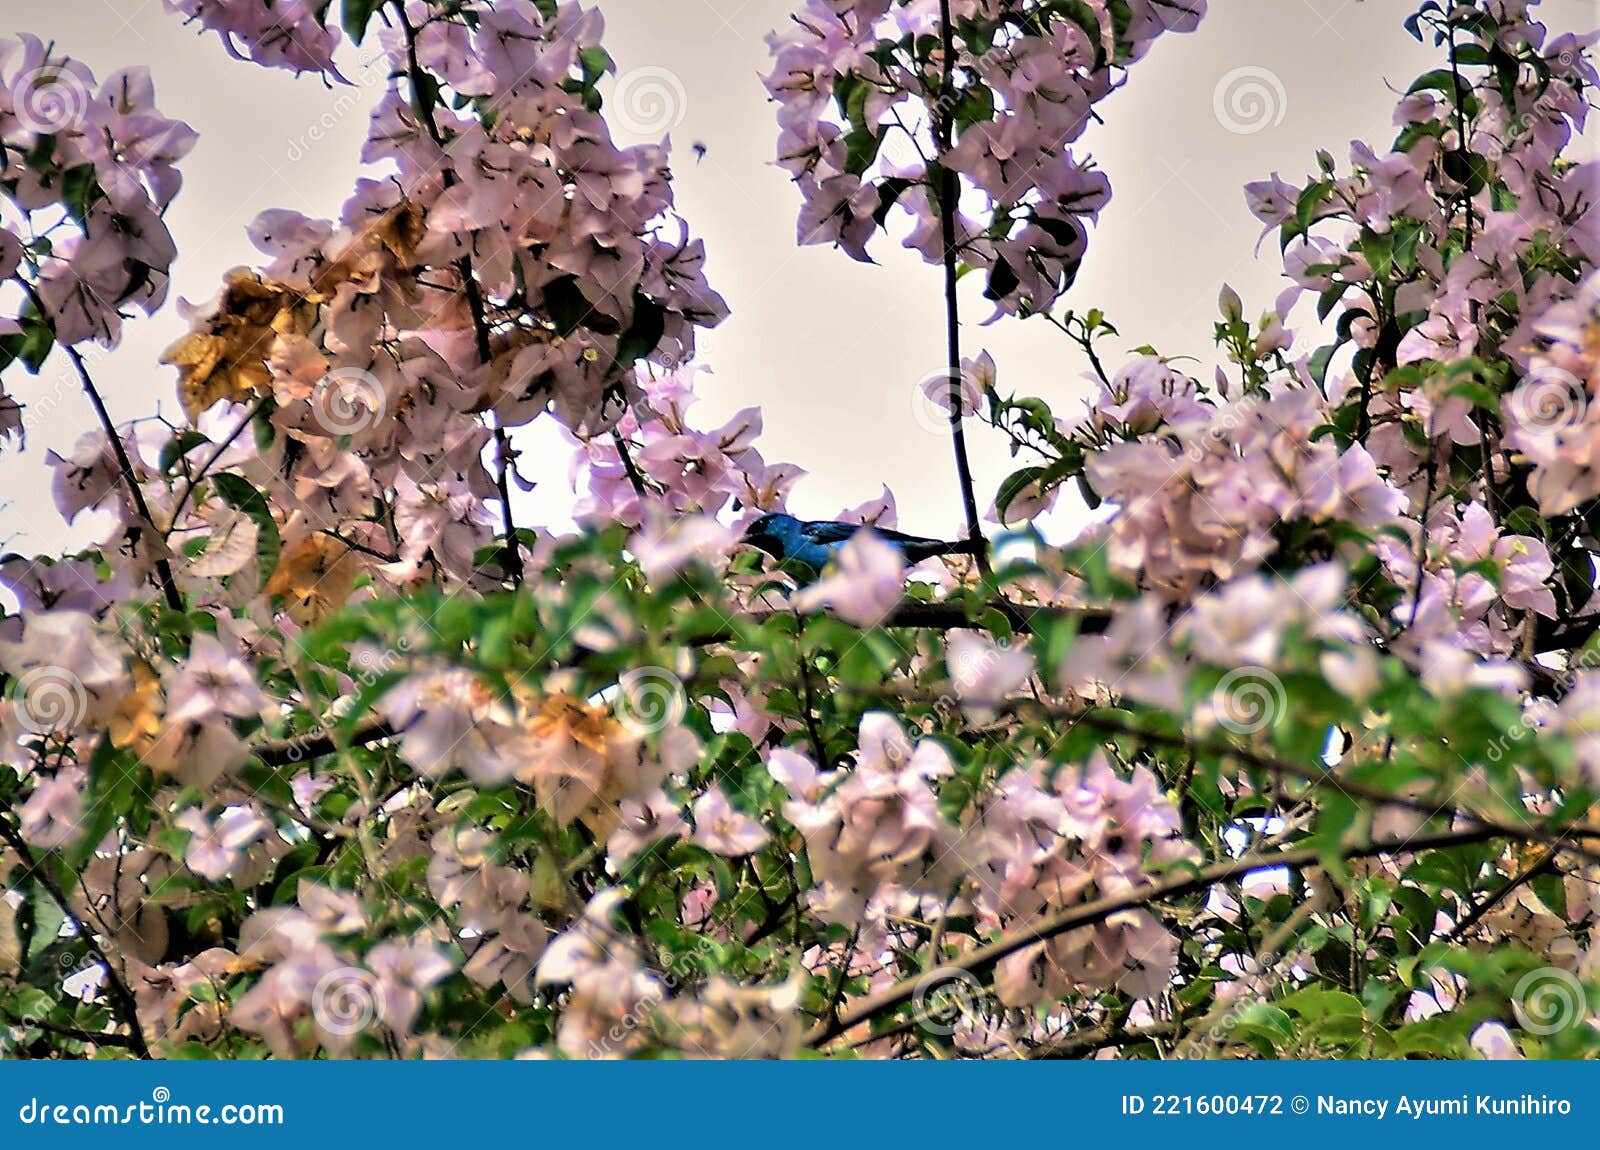 on the branch of the pink bougainvillea a blue bird dacnis cayana